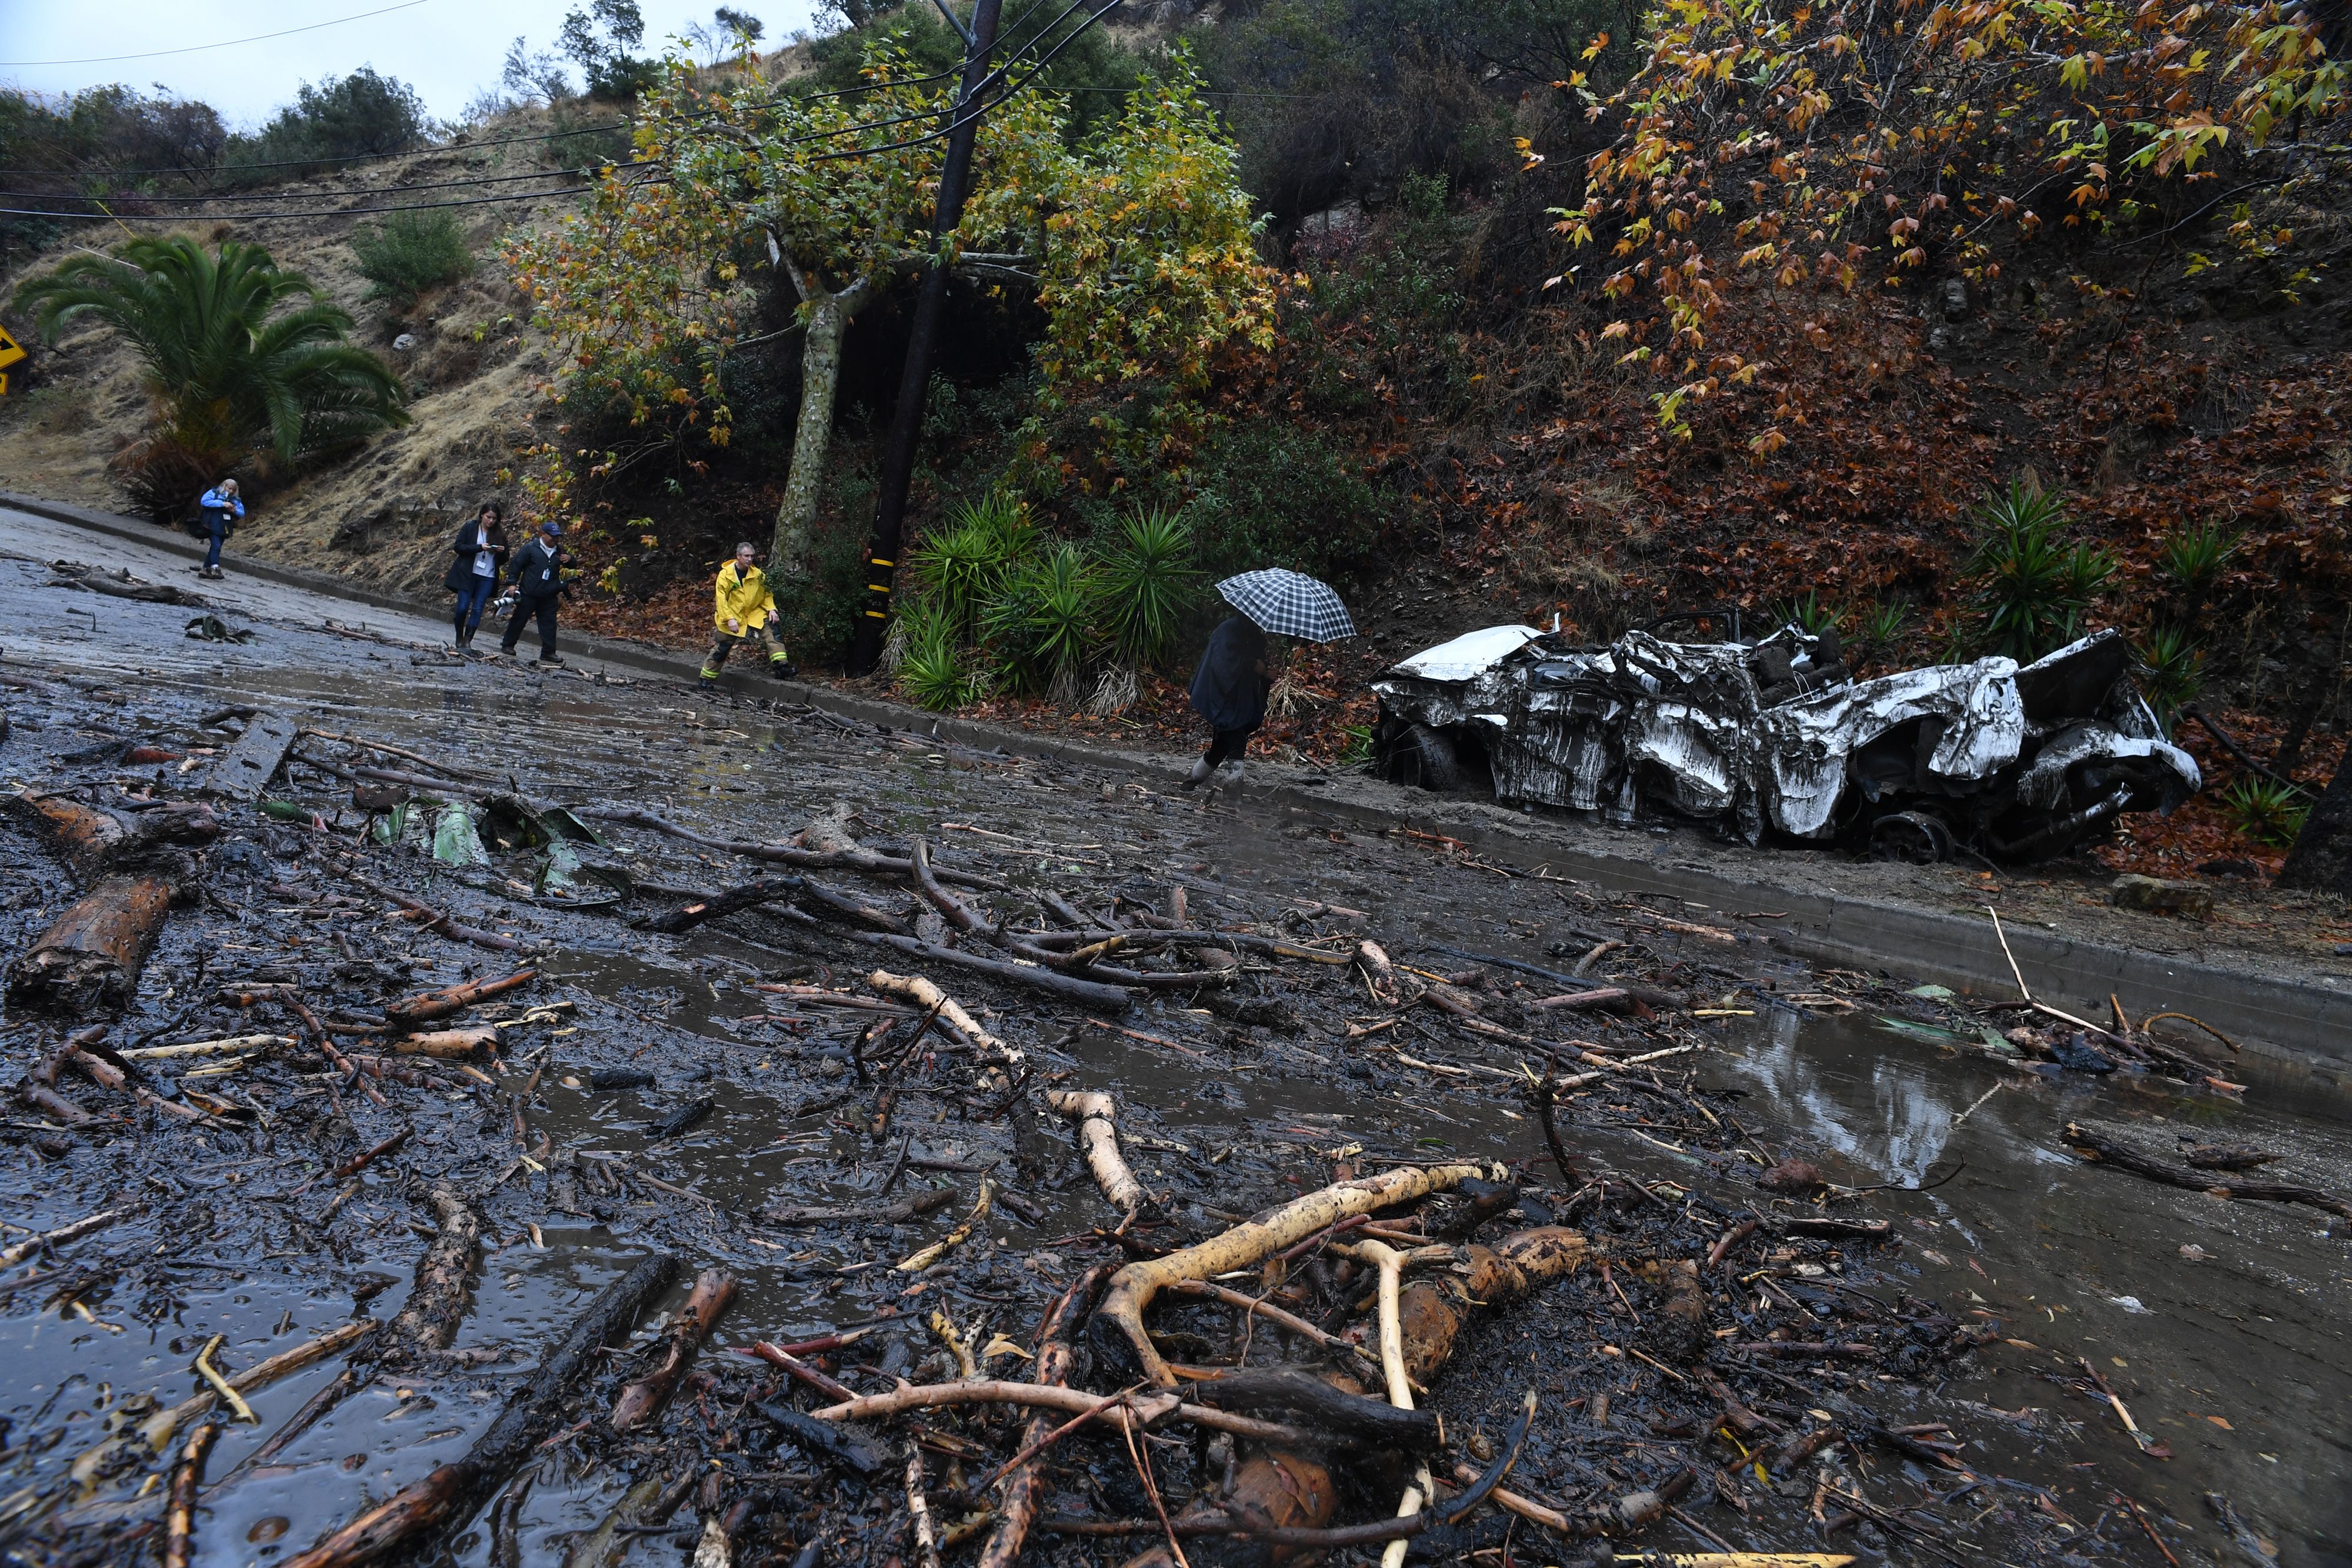 A firefighter (in yellow) instructs journalists to retreat to safer ground after a rain-driven mudslide destroyed two cars and damaged property in a neighborhood under mandatory evacuation in Burbank, California, January 9, 2018. (ROBYN BECK—AFP/Getty Images)